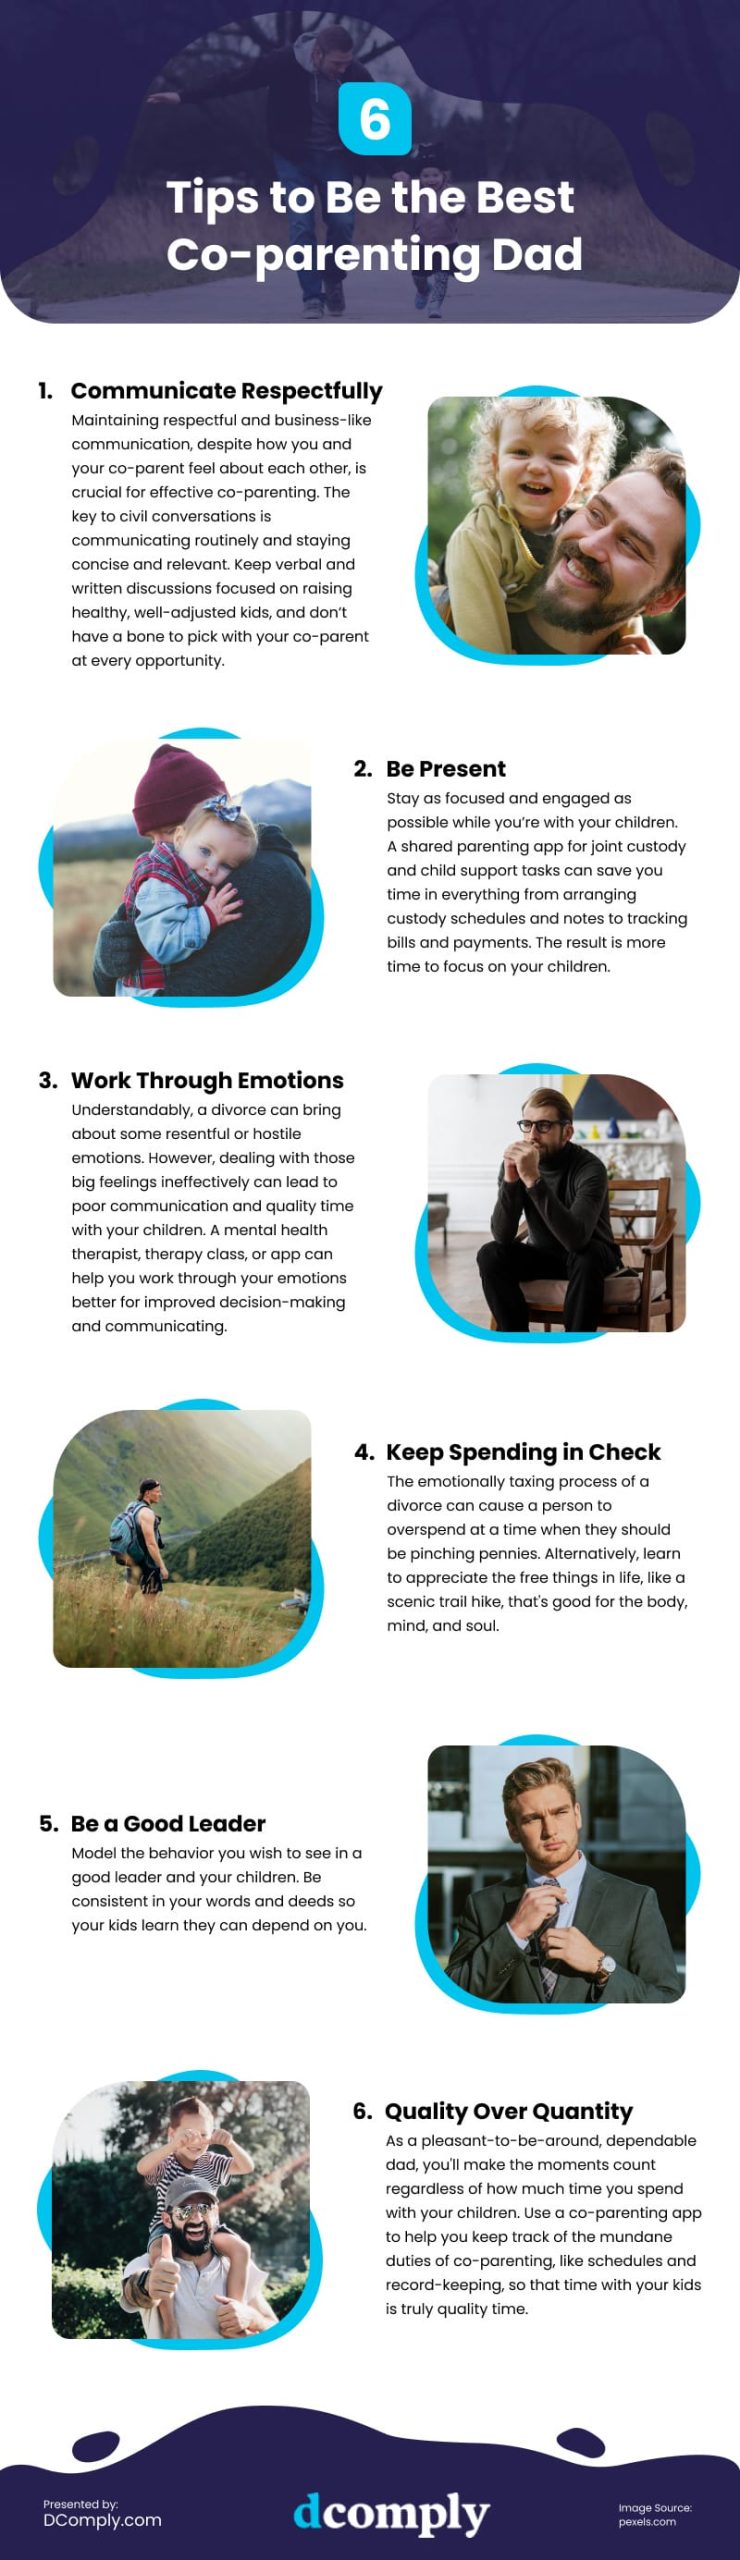 6 Tips to Be the Best Co-parenting Dad Infographic